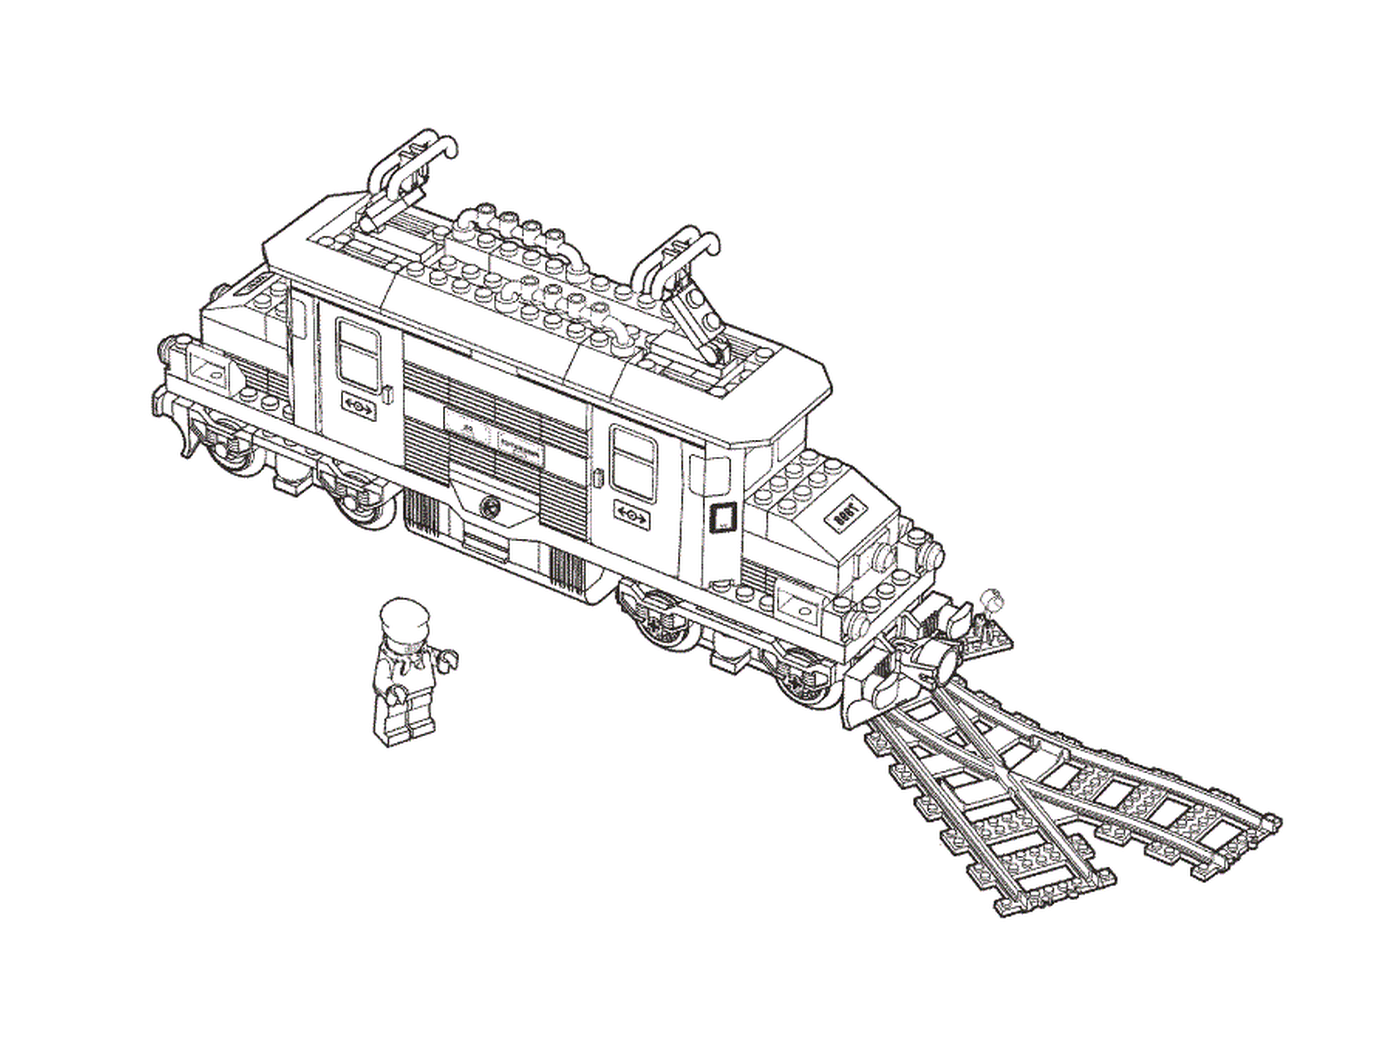  Drawing of a Lego toy train 